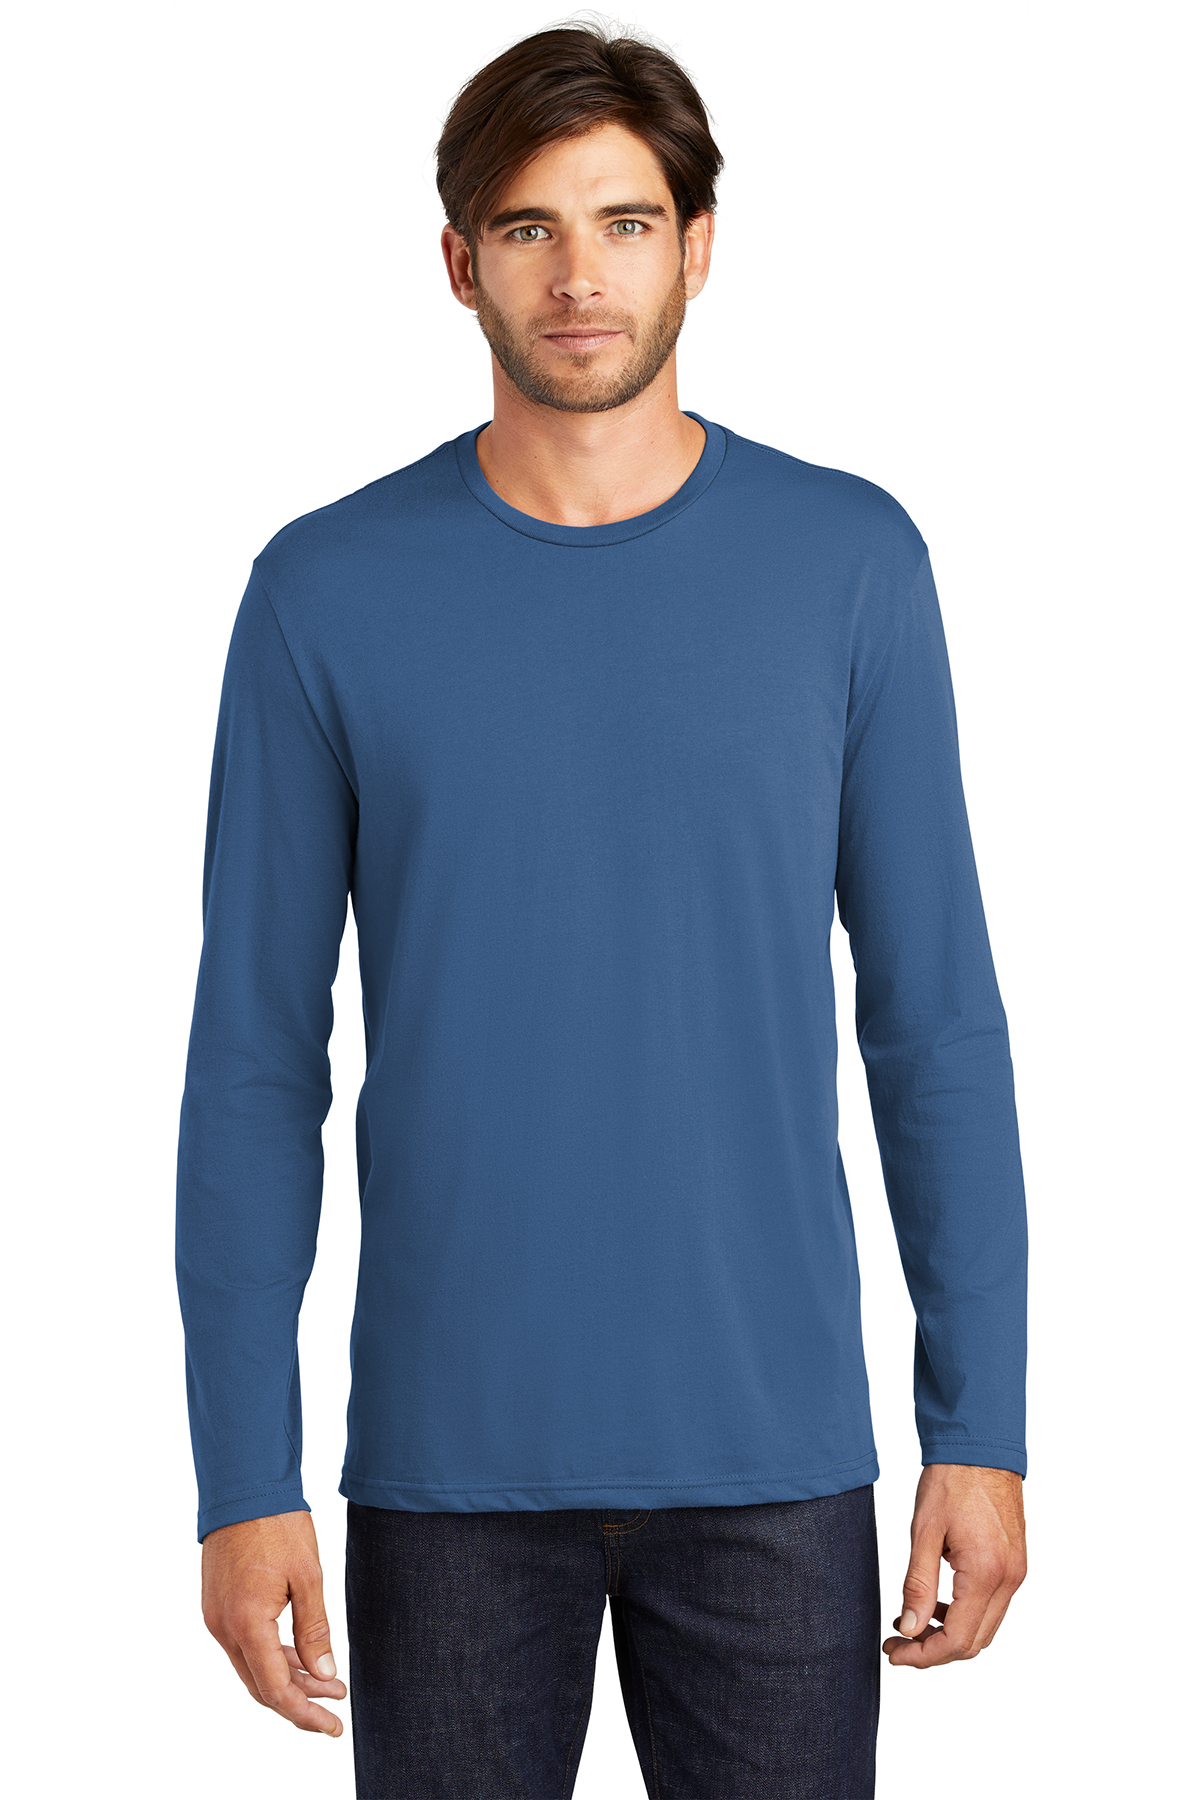 District Made Mens Perfect Weight Long Sleeve Tee Maritime Blue Large